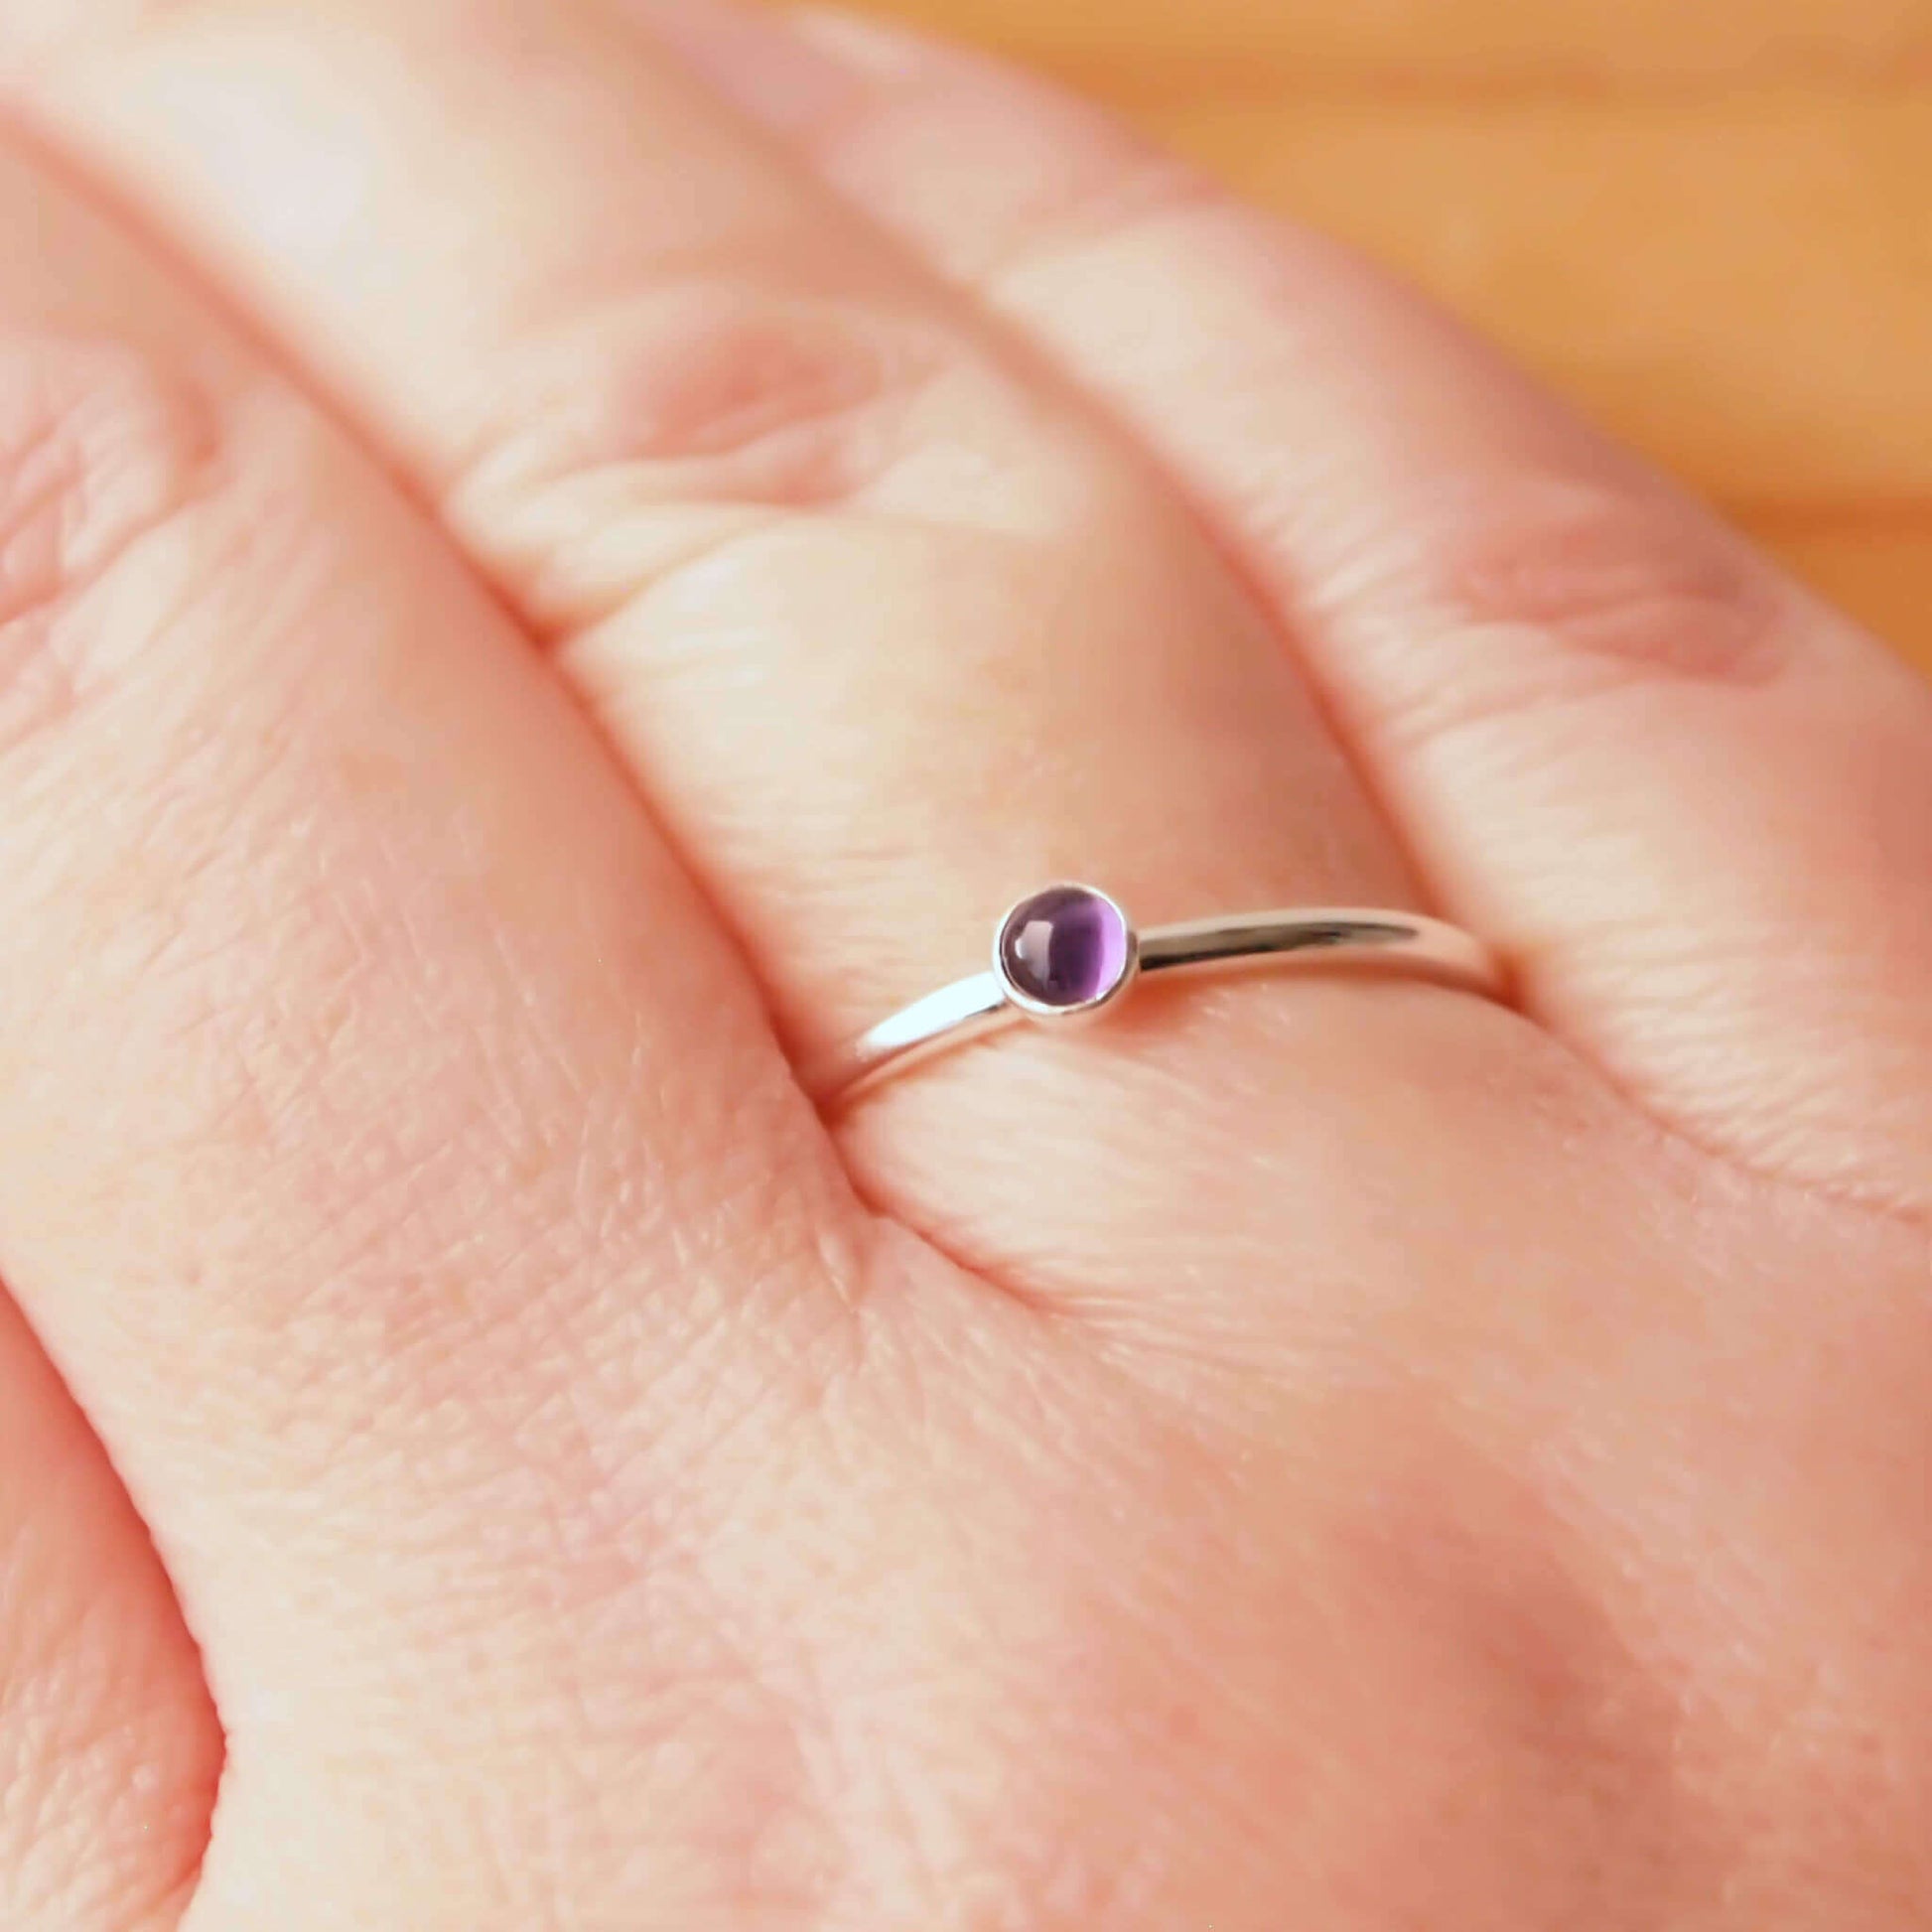 Amethyst and Sterling Silver Ring made from a small 3mm round deep purple Amethyst gemstone set simply onto a modern band of fully round wire. Handmade to your ring size by maram jewellery in Scotland